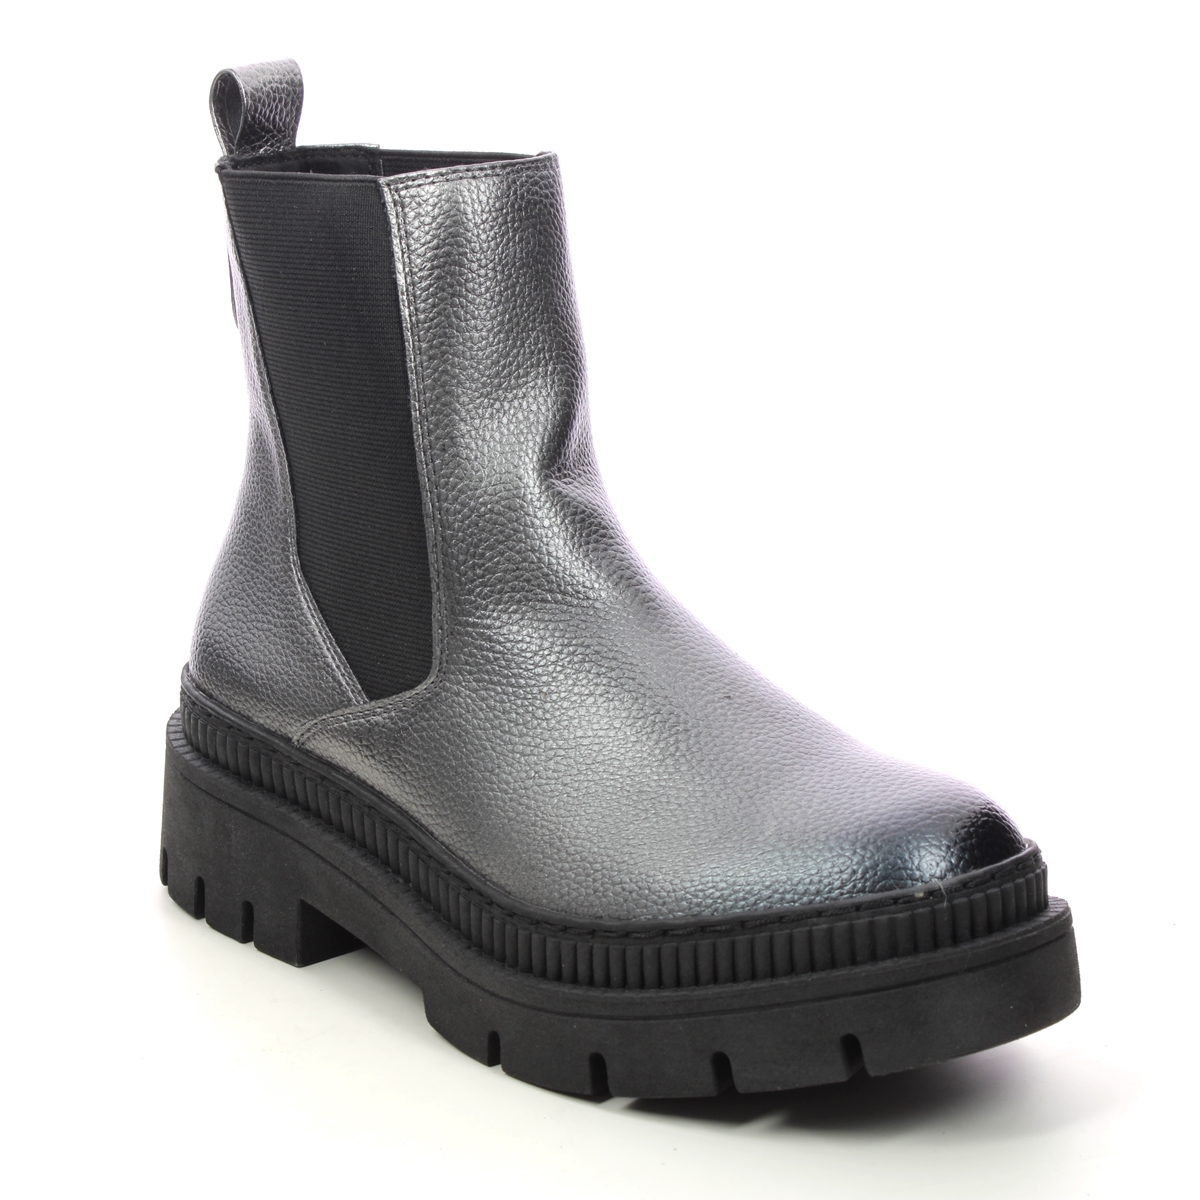 Marco Tozzi Rostra Chelsea Pewter Womens Chelsea Boots 25822-41-915 In Size 36 In Plain Pewter